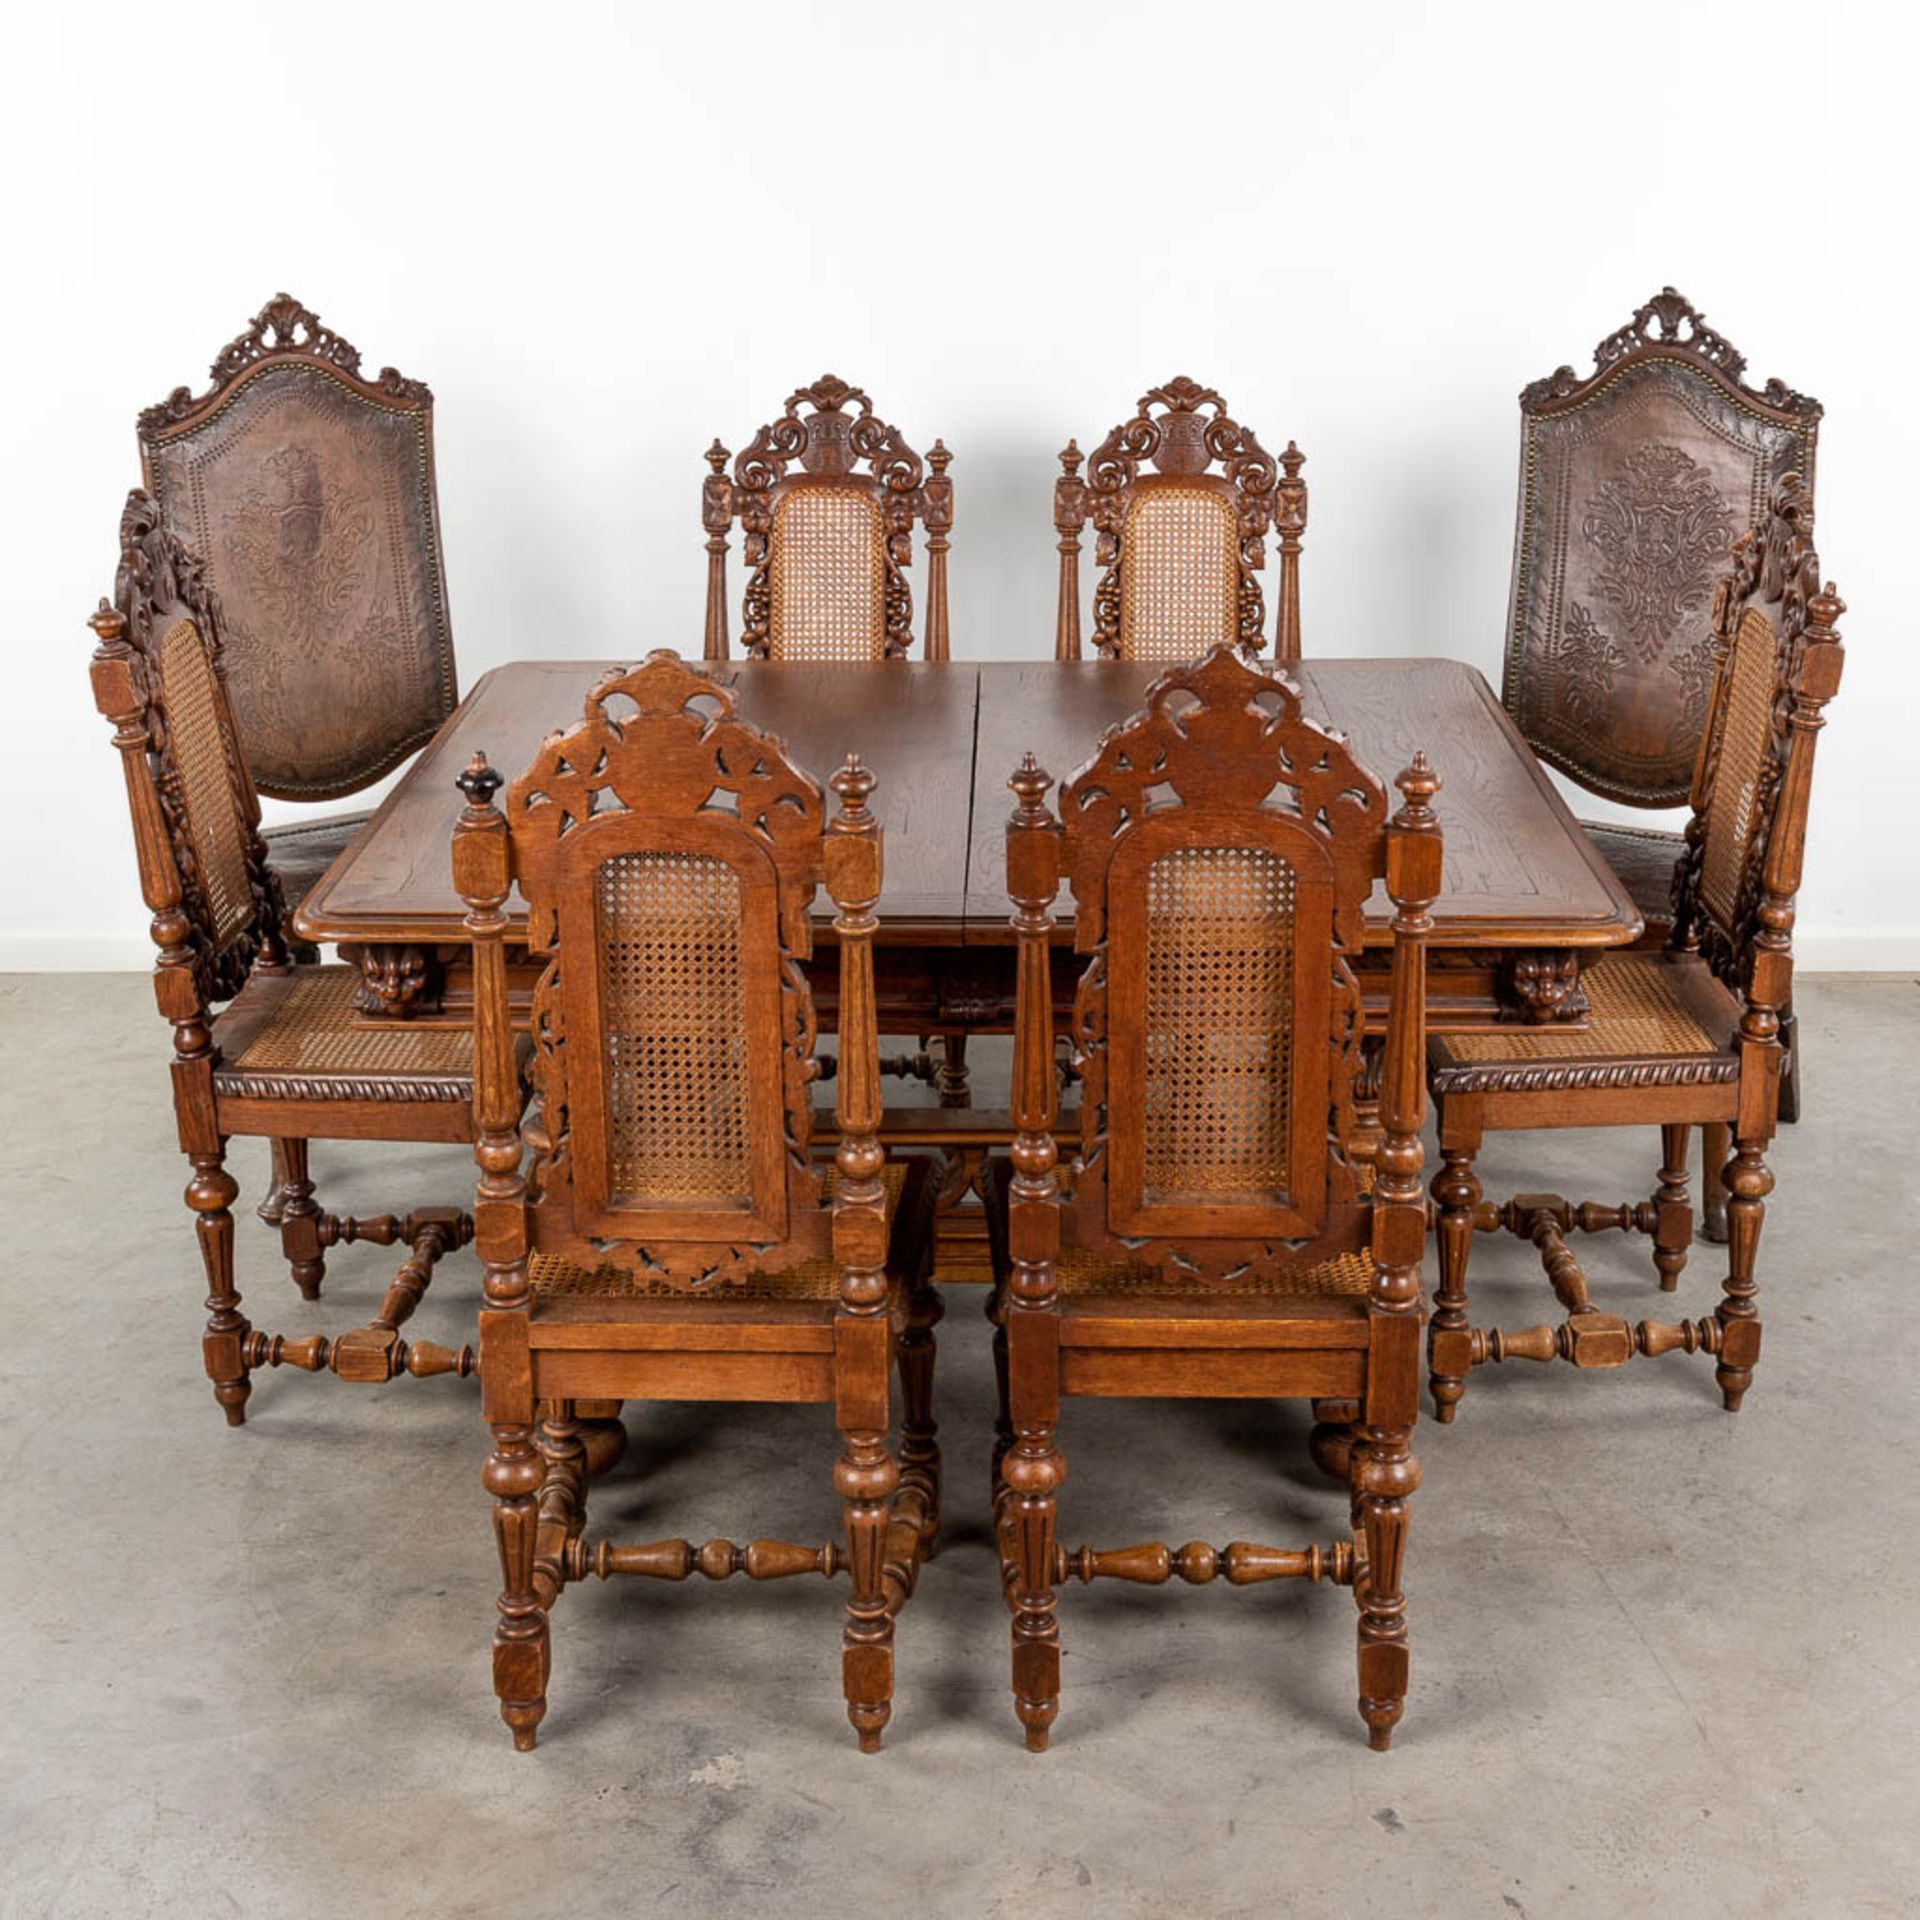 An antique table with 6 chairs in renaissance style. (L:120 x W:142 x H:72 cm)